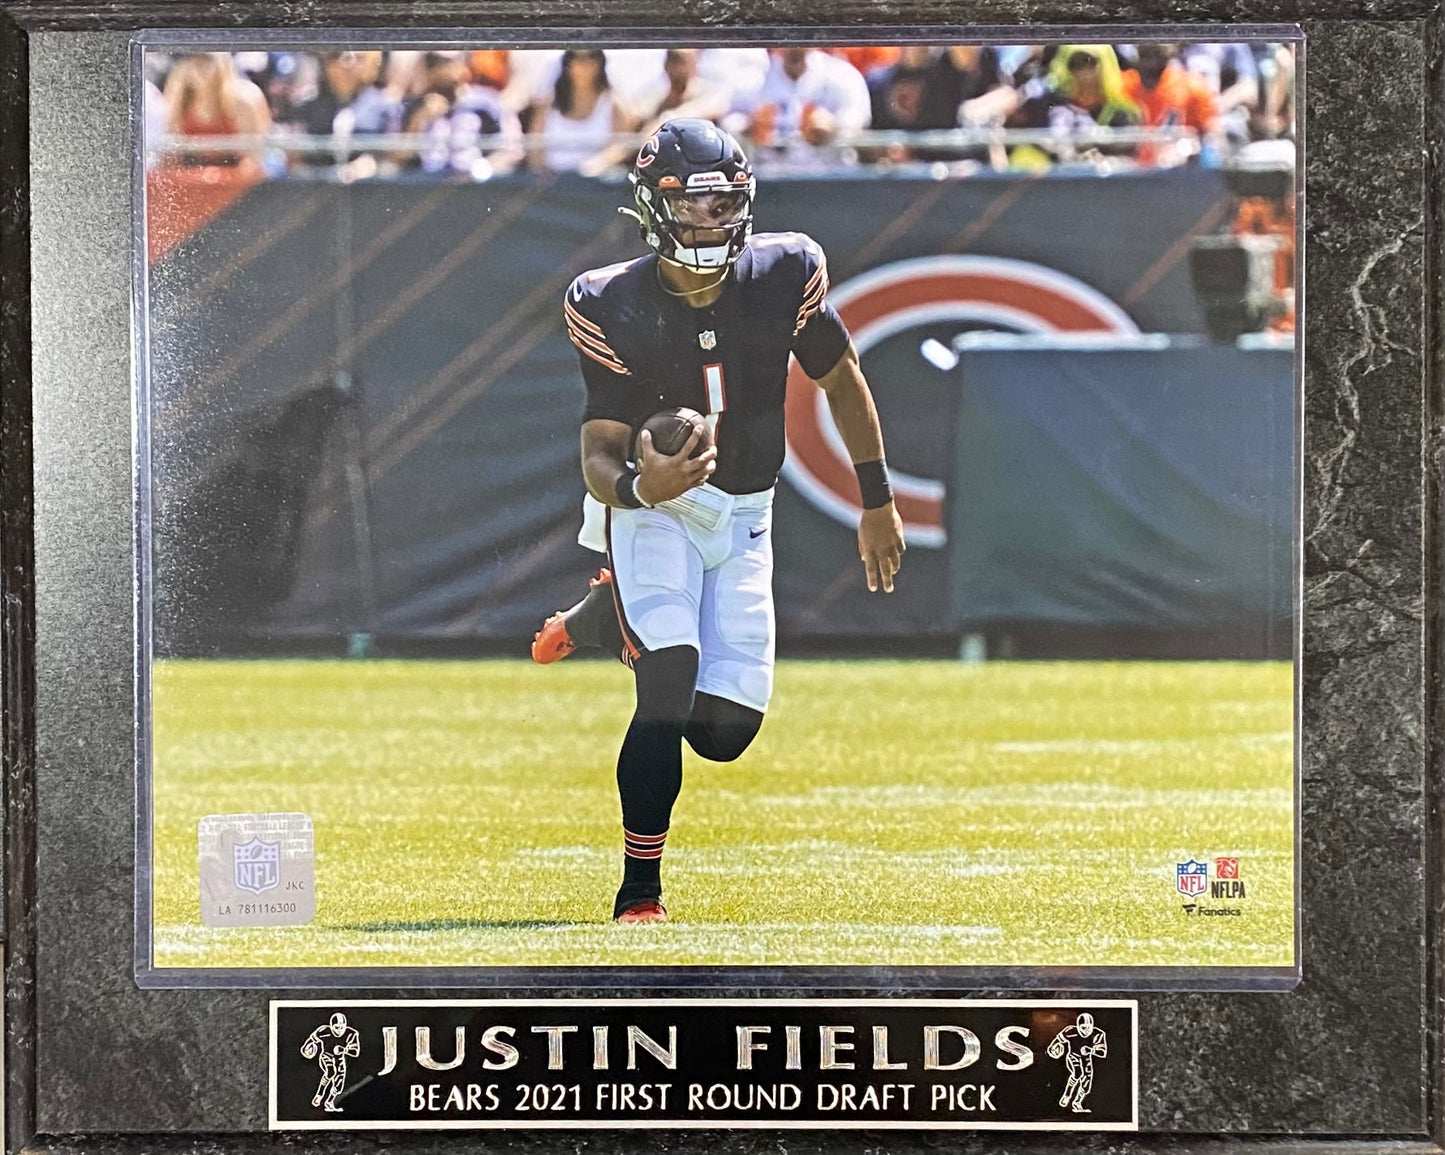 Justin Fields 2021 First Round Draft Pick Bears Plaque